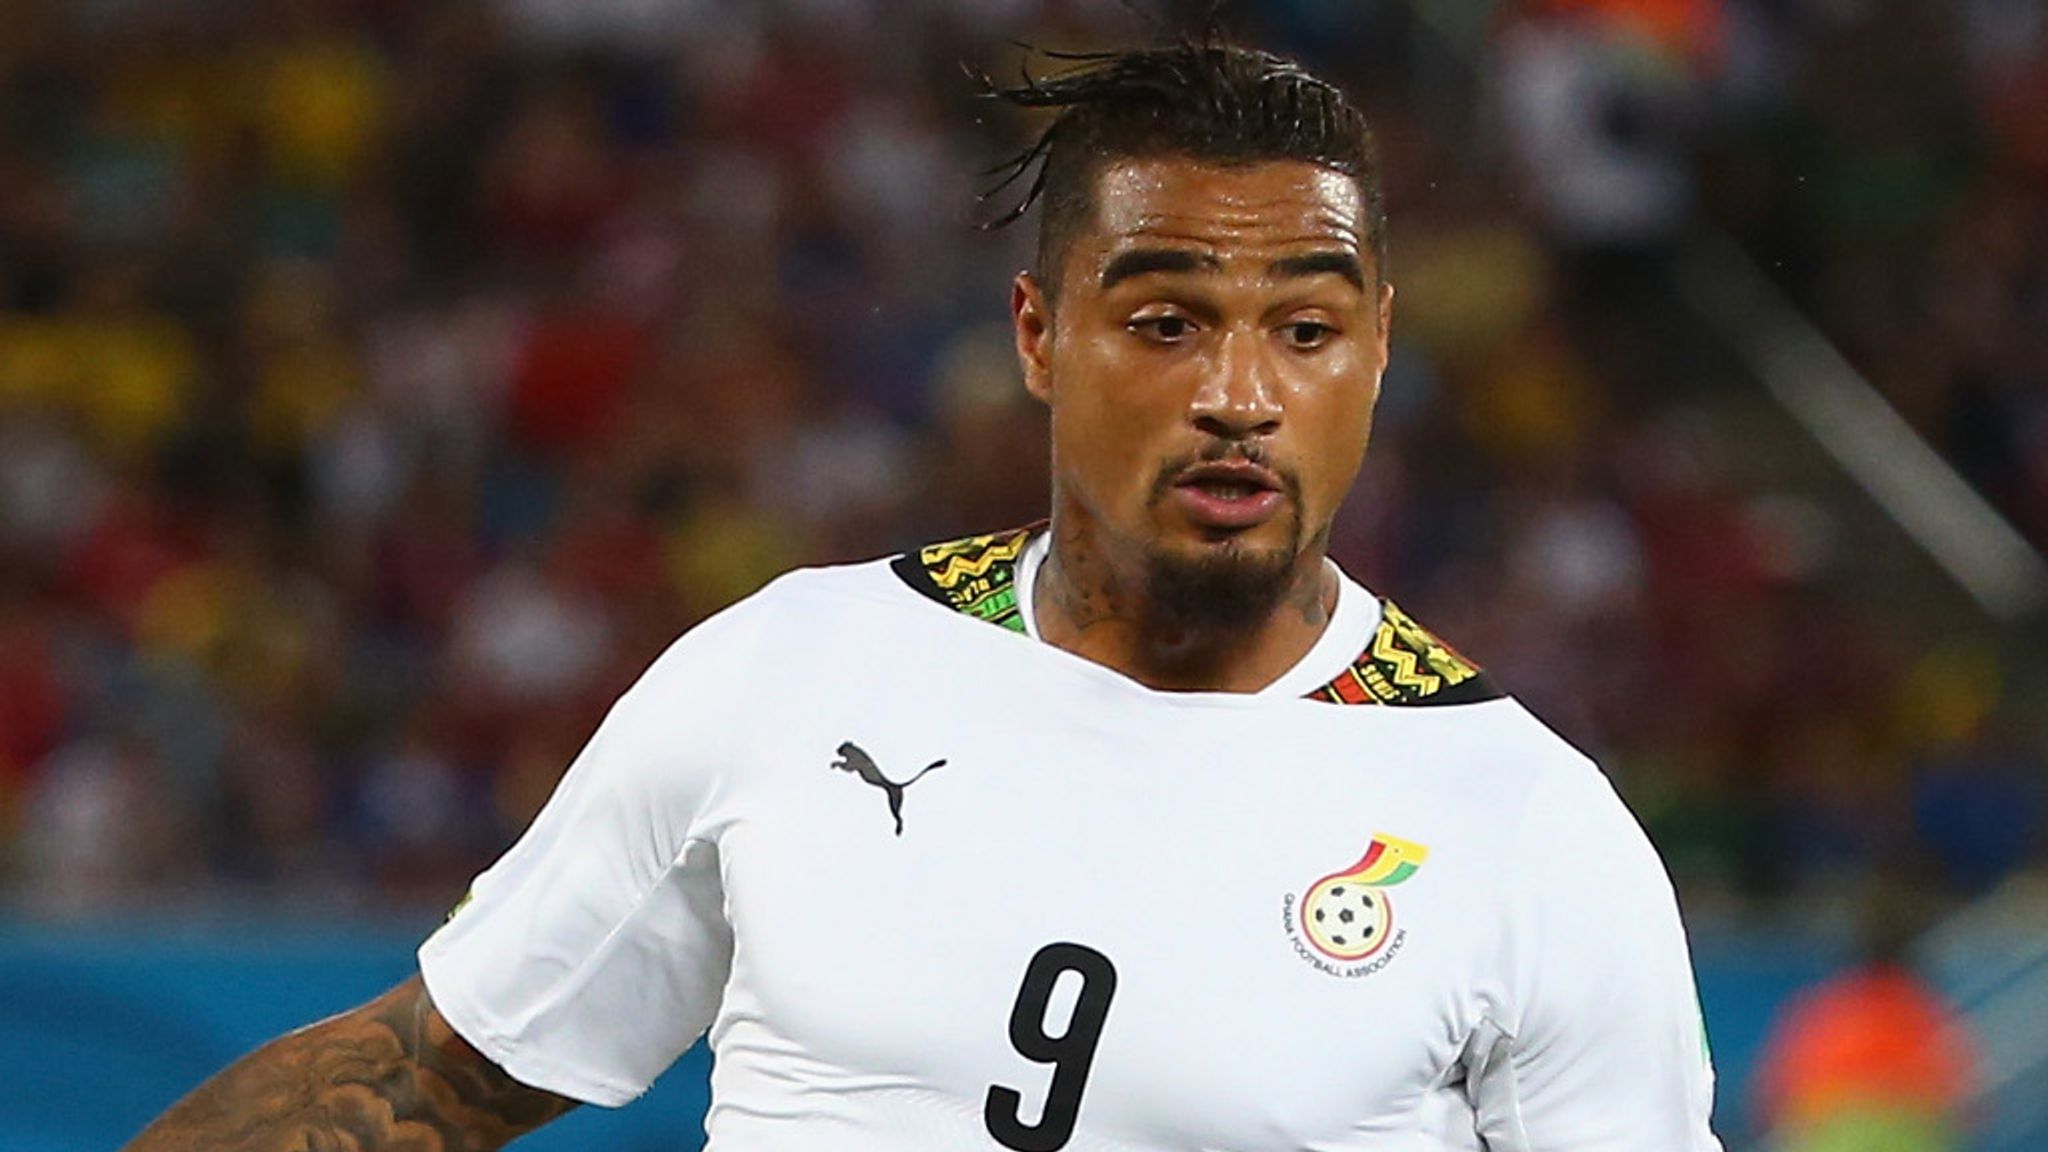 World Cup: Kevin-Prince Boateng describes Ghana's preparations as 'amateurish' | Football News | Sky Sports